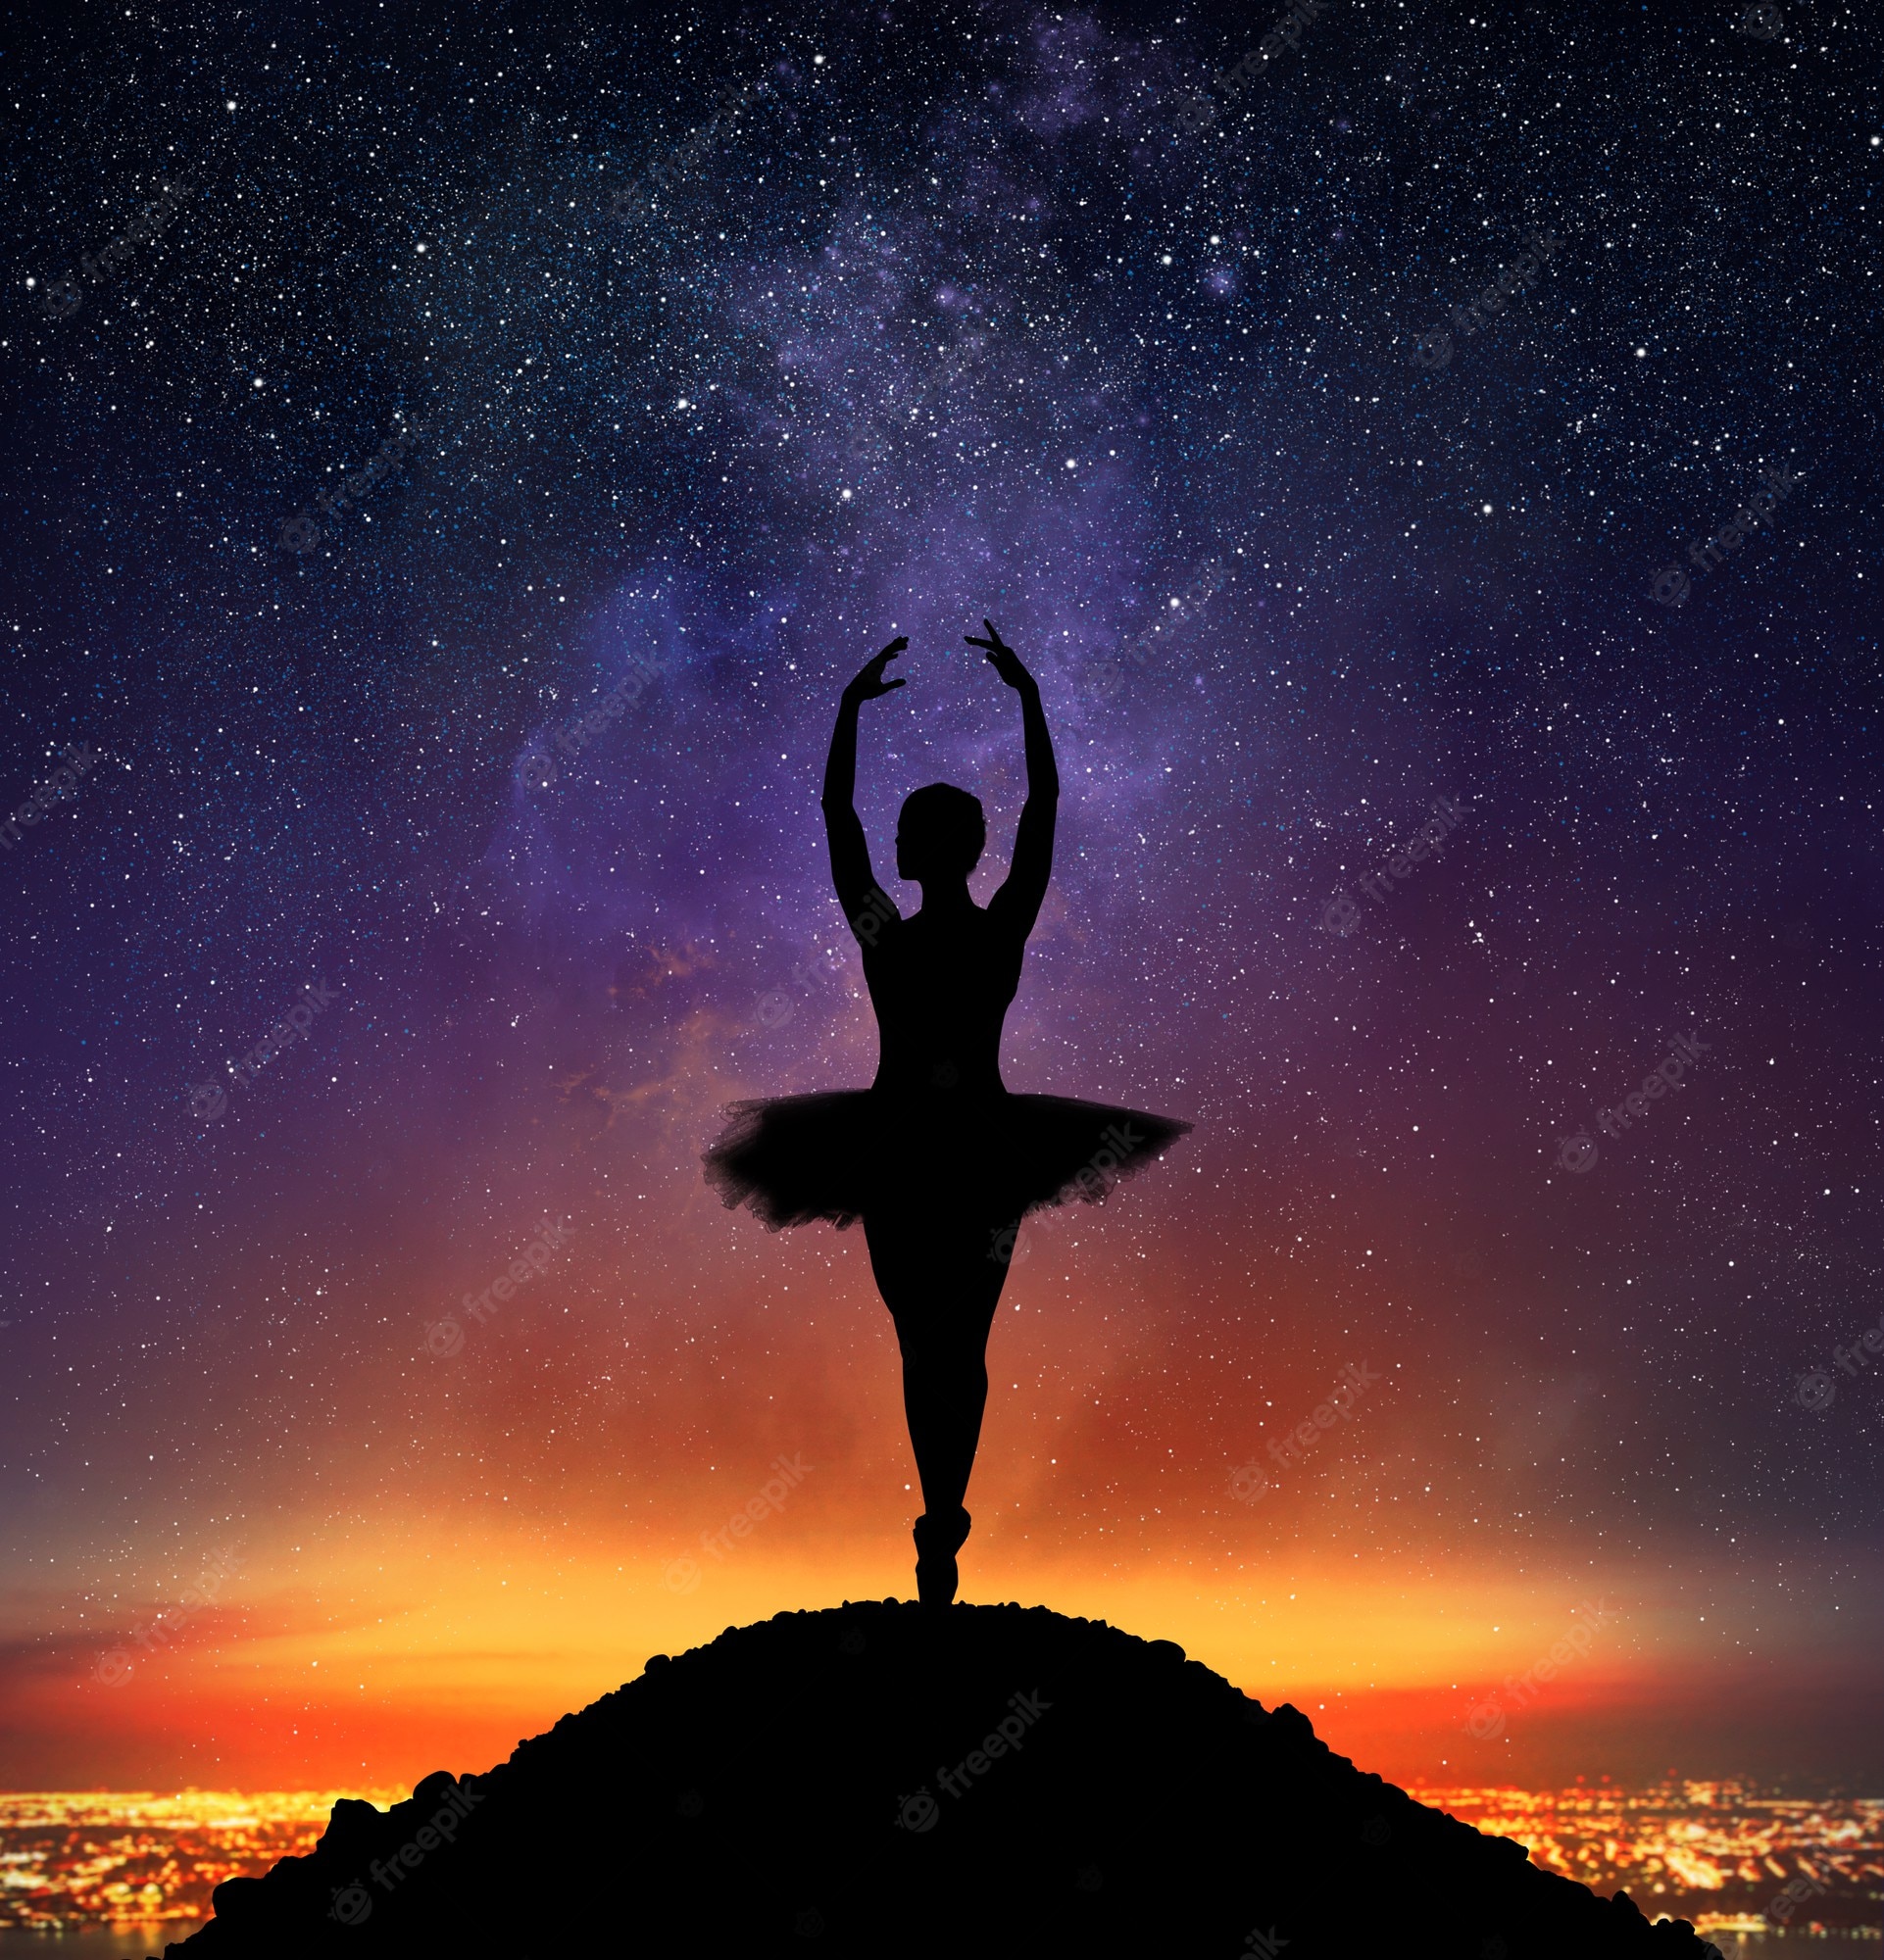 Premium Photo. Dancer in a pose of classical dance on pointe on a mountain